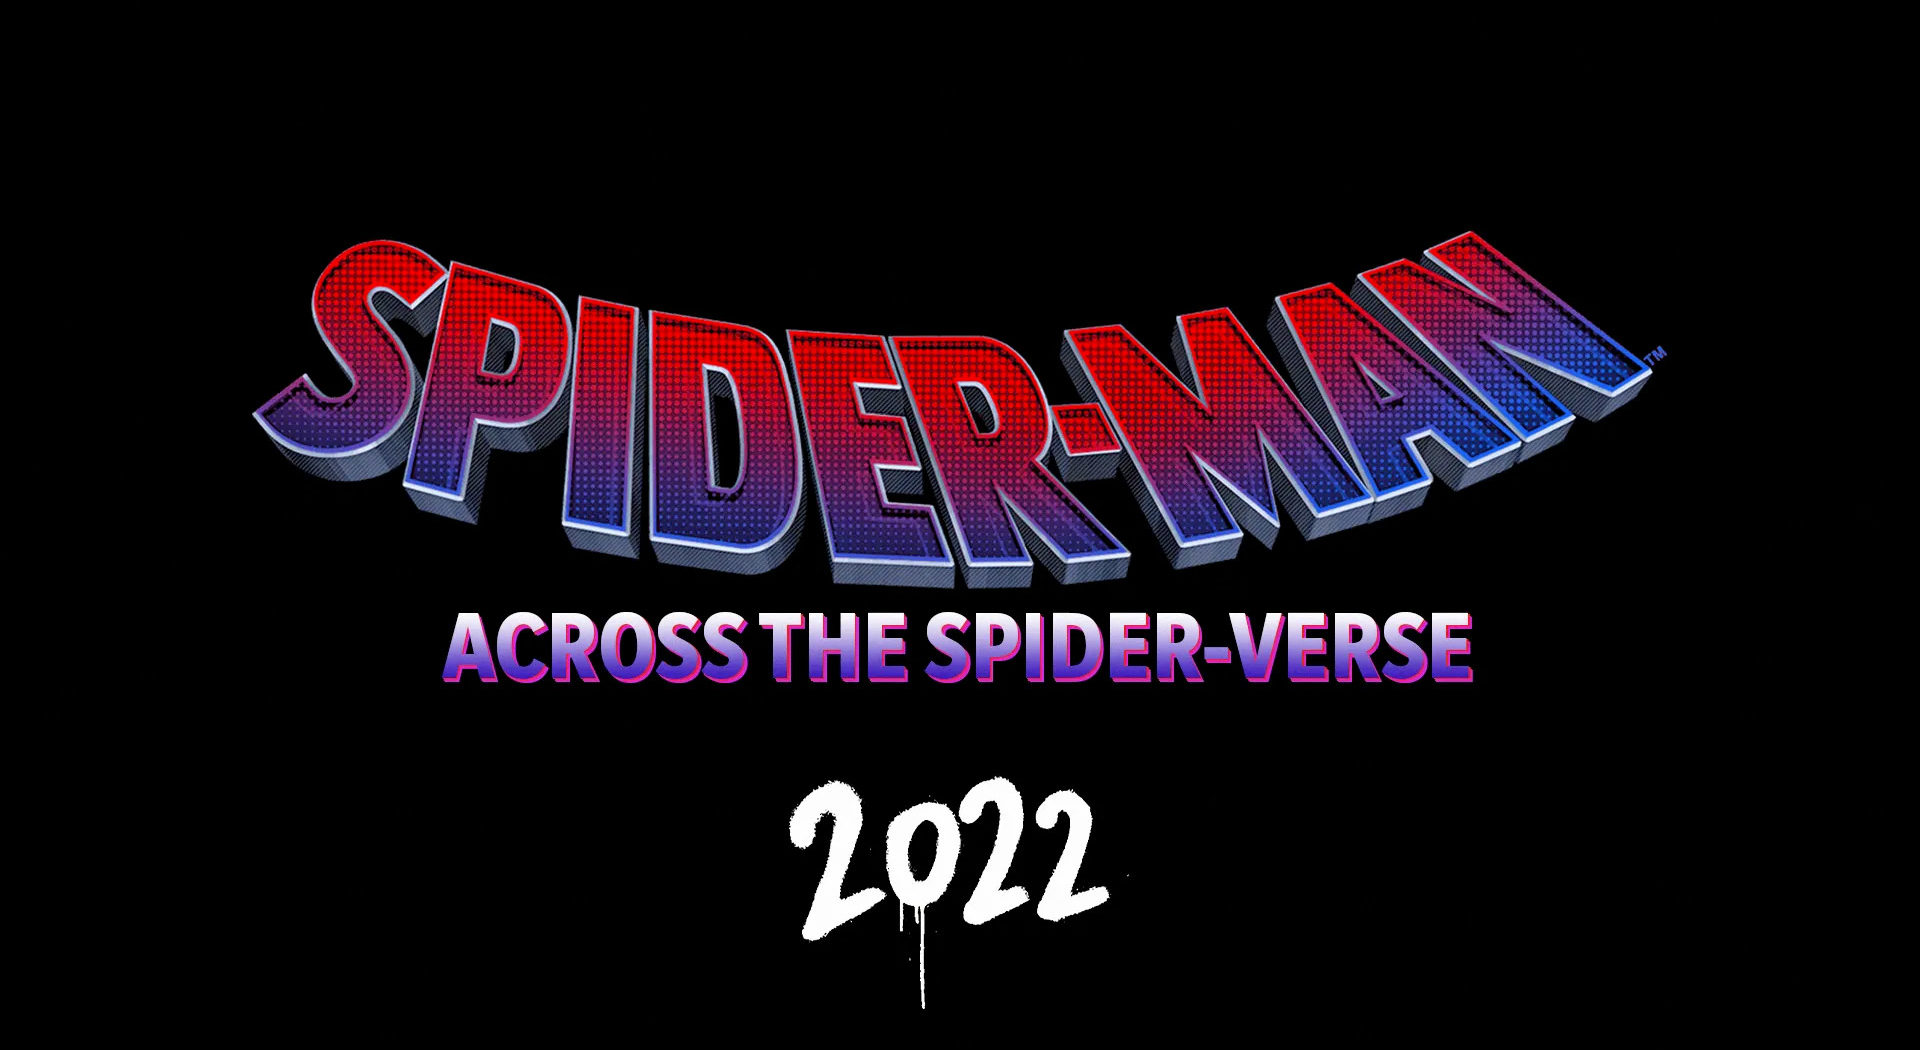 SPIDER-MAN: ACROSS THE SPIDER-VERSE ComicsOwl Sony Pictures